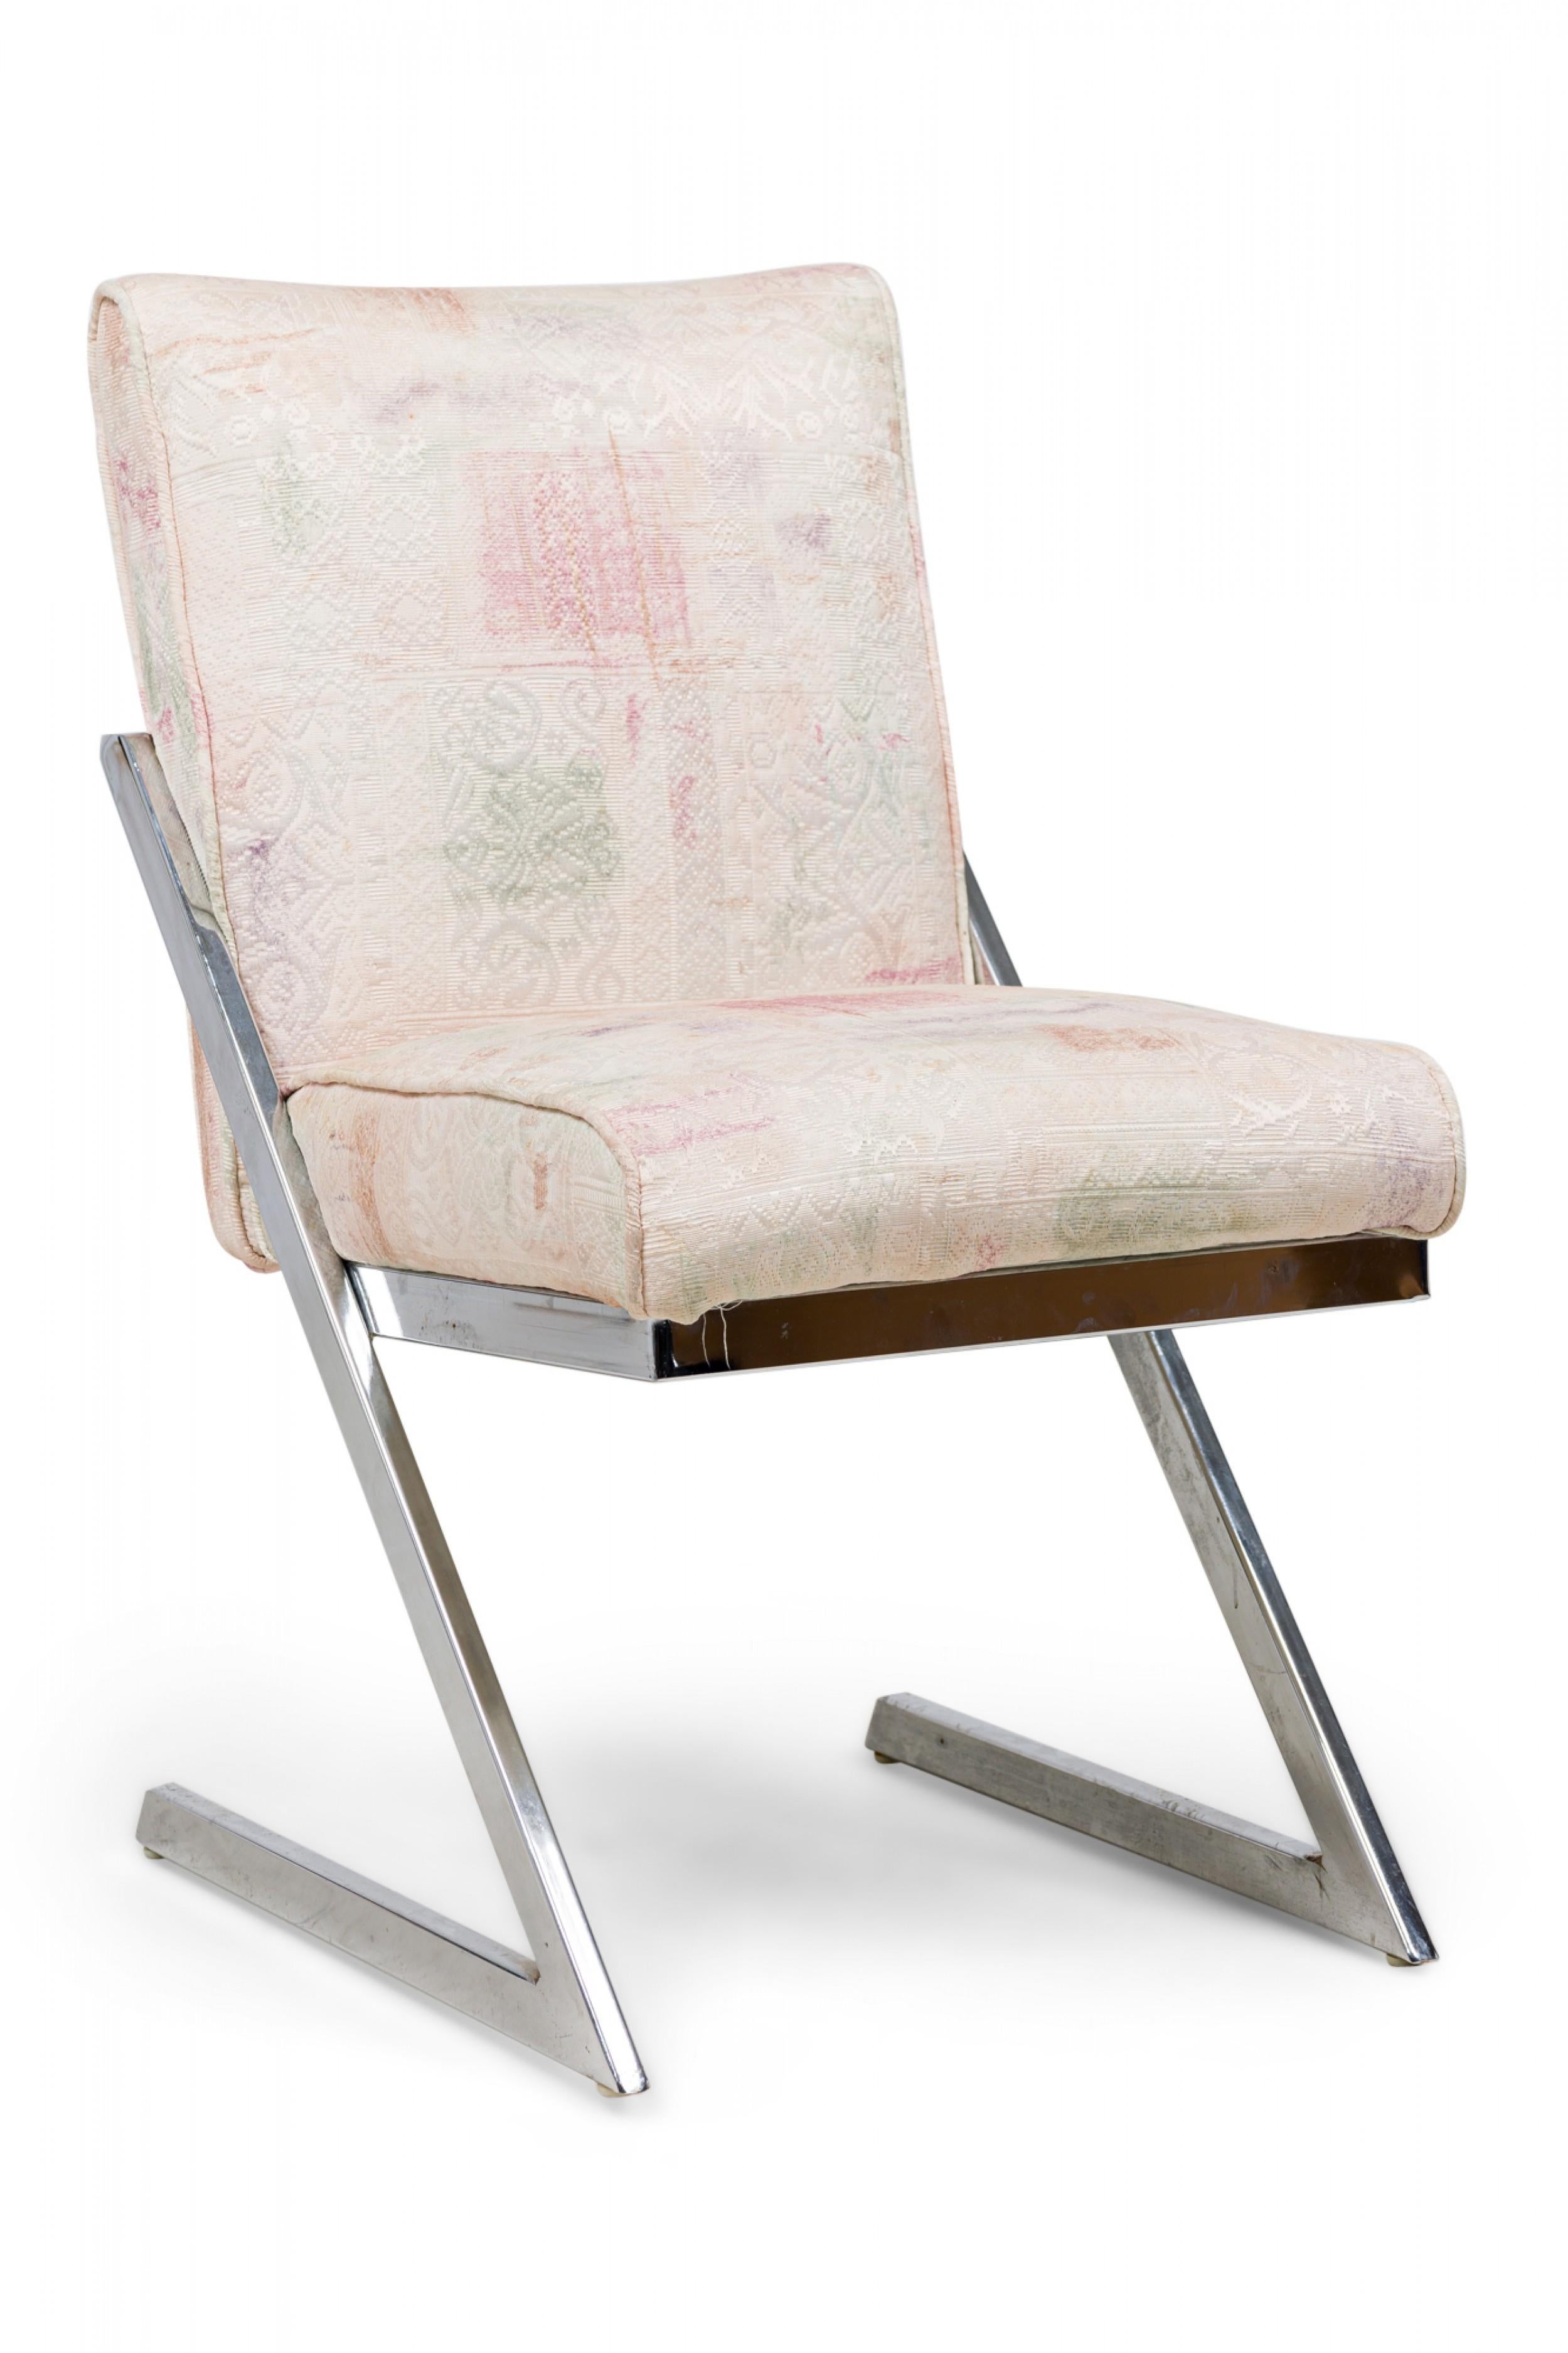 Set of 6 Dia Midcentury American Chrome Z Chairs in Beige and Pastel Upholstery For Sale 7